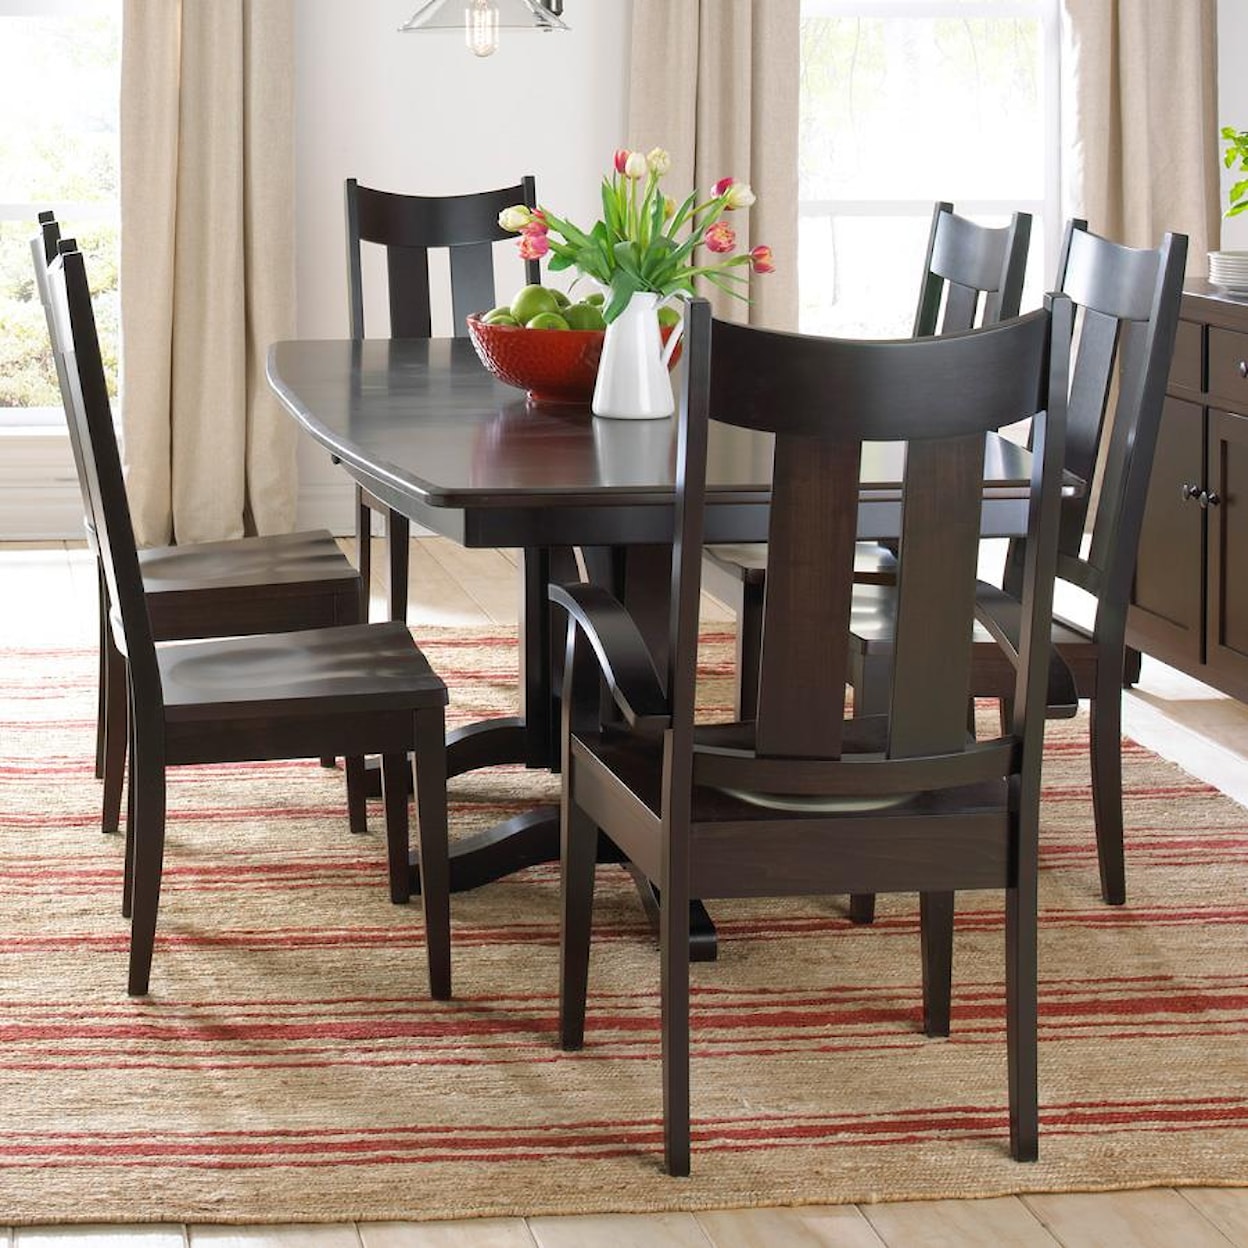 Daniel's Amish Millsdale Table and Chair Set